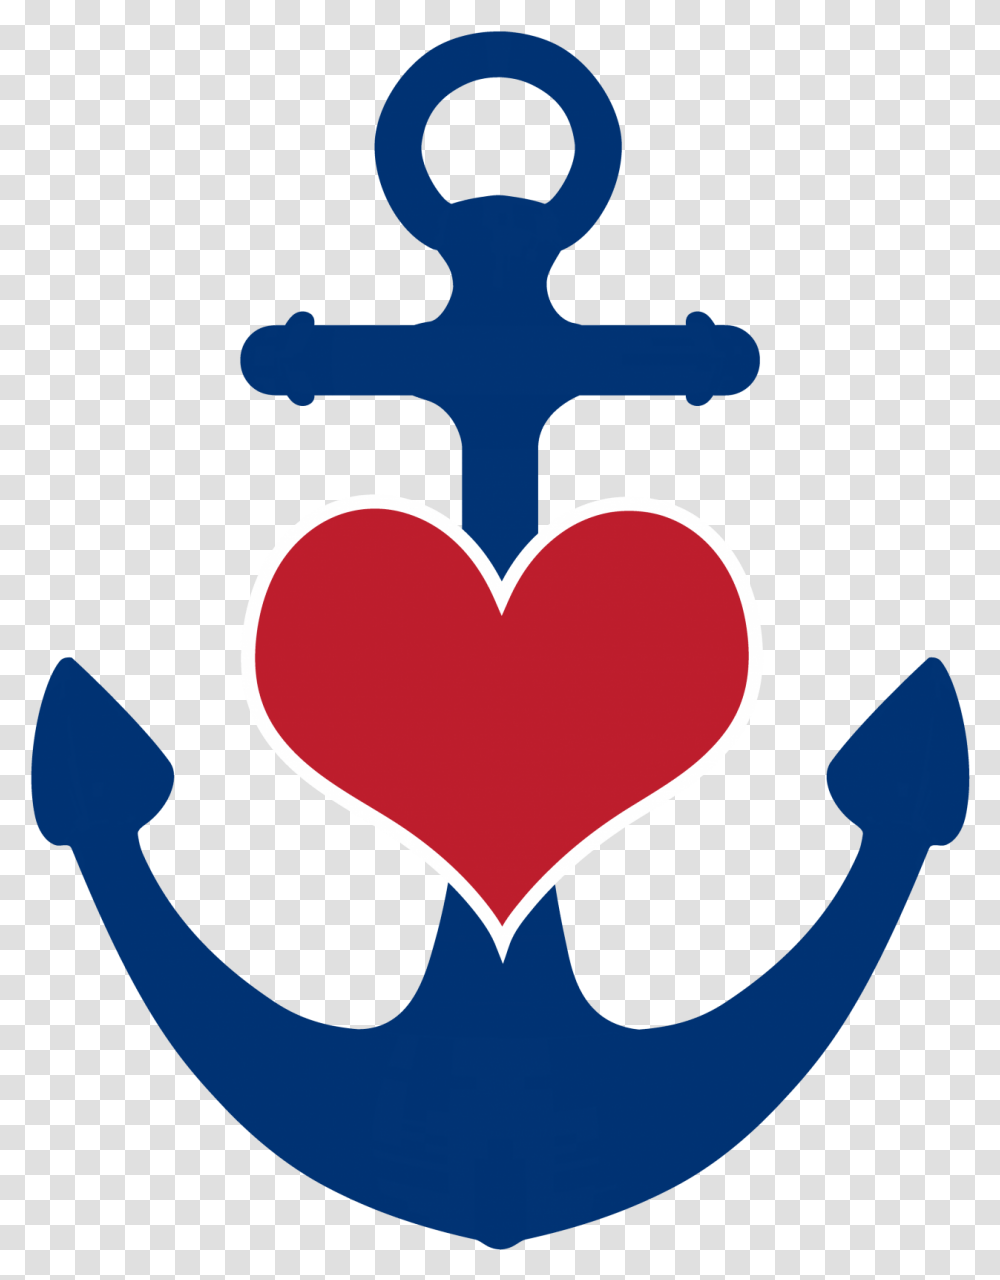 Anchor With Heart Free Stock Photo Blue Anchor Heart Transparent Png